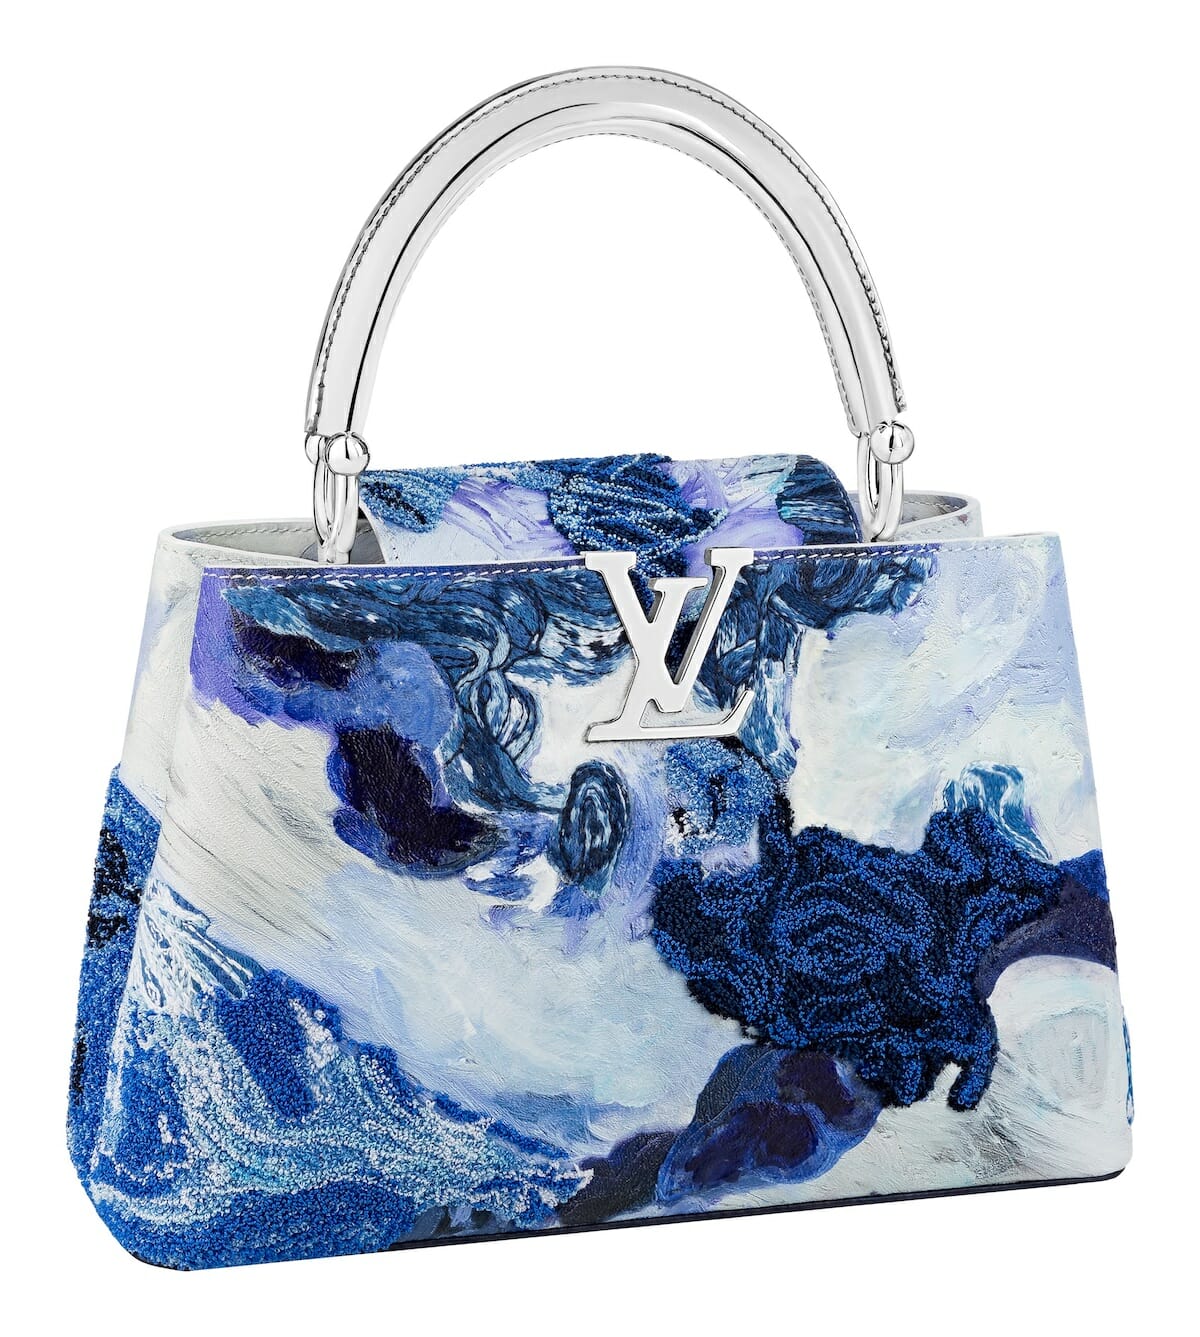 Louis Vuitton joins forces with 6 artists to reimagine a signature bag